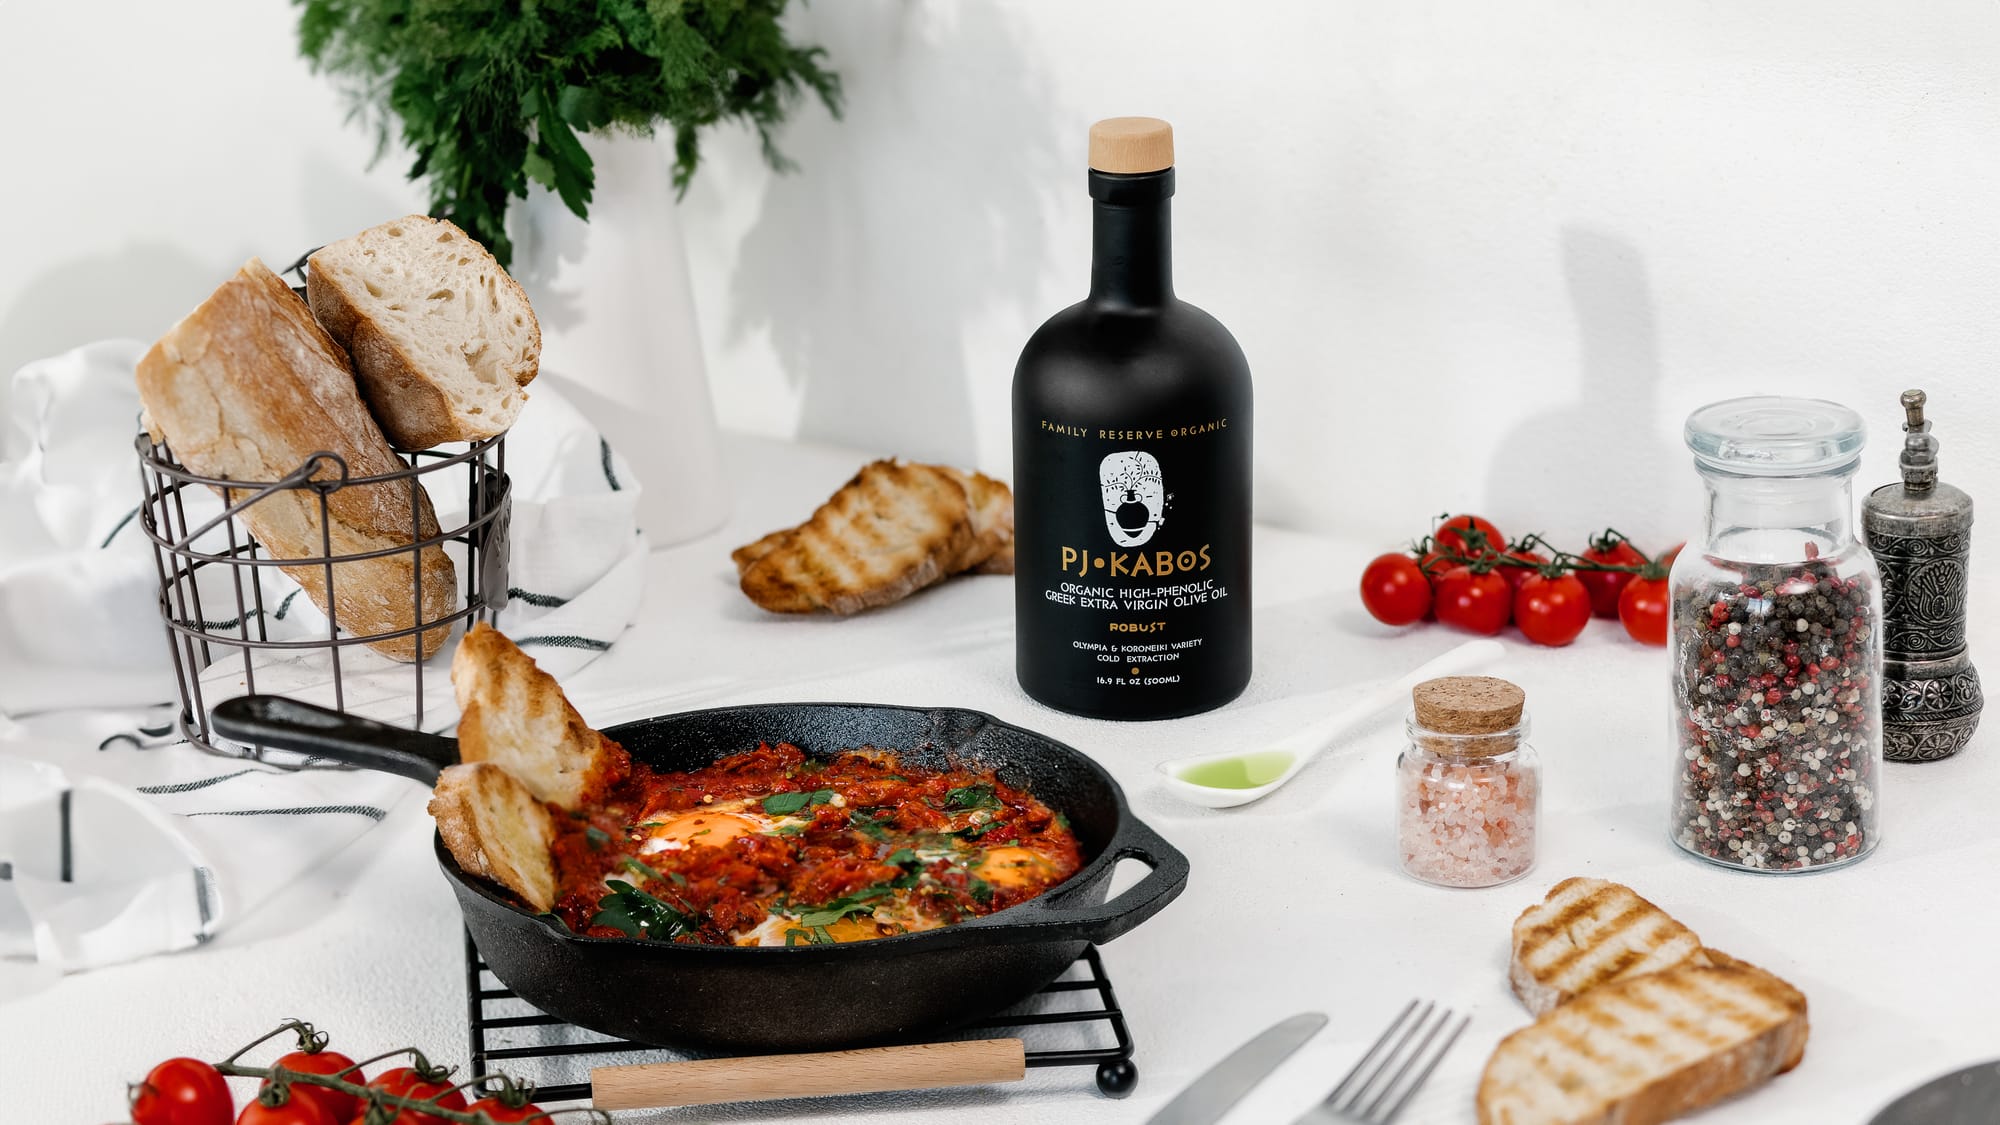 A Bottle of P Kabos Robust High-phenolic Extra Virgin Olive Oil on a table set for breakfast with the recently made tomatoes and eggs still in the skillet, fresh bread salt and pepper while a phenolic shot of oil rests in a spoon ready to be had before or during the meal.